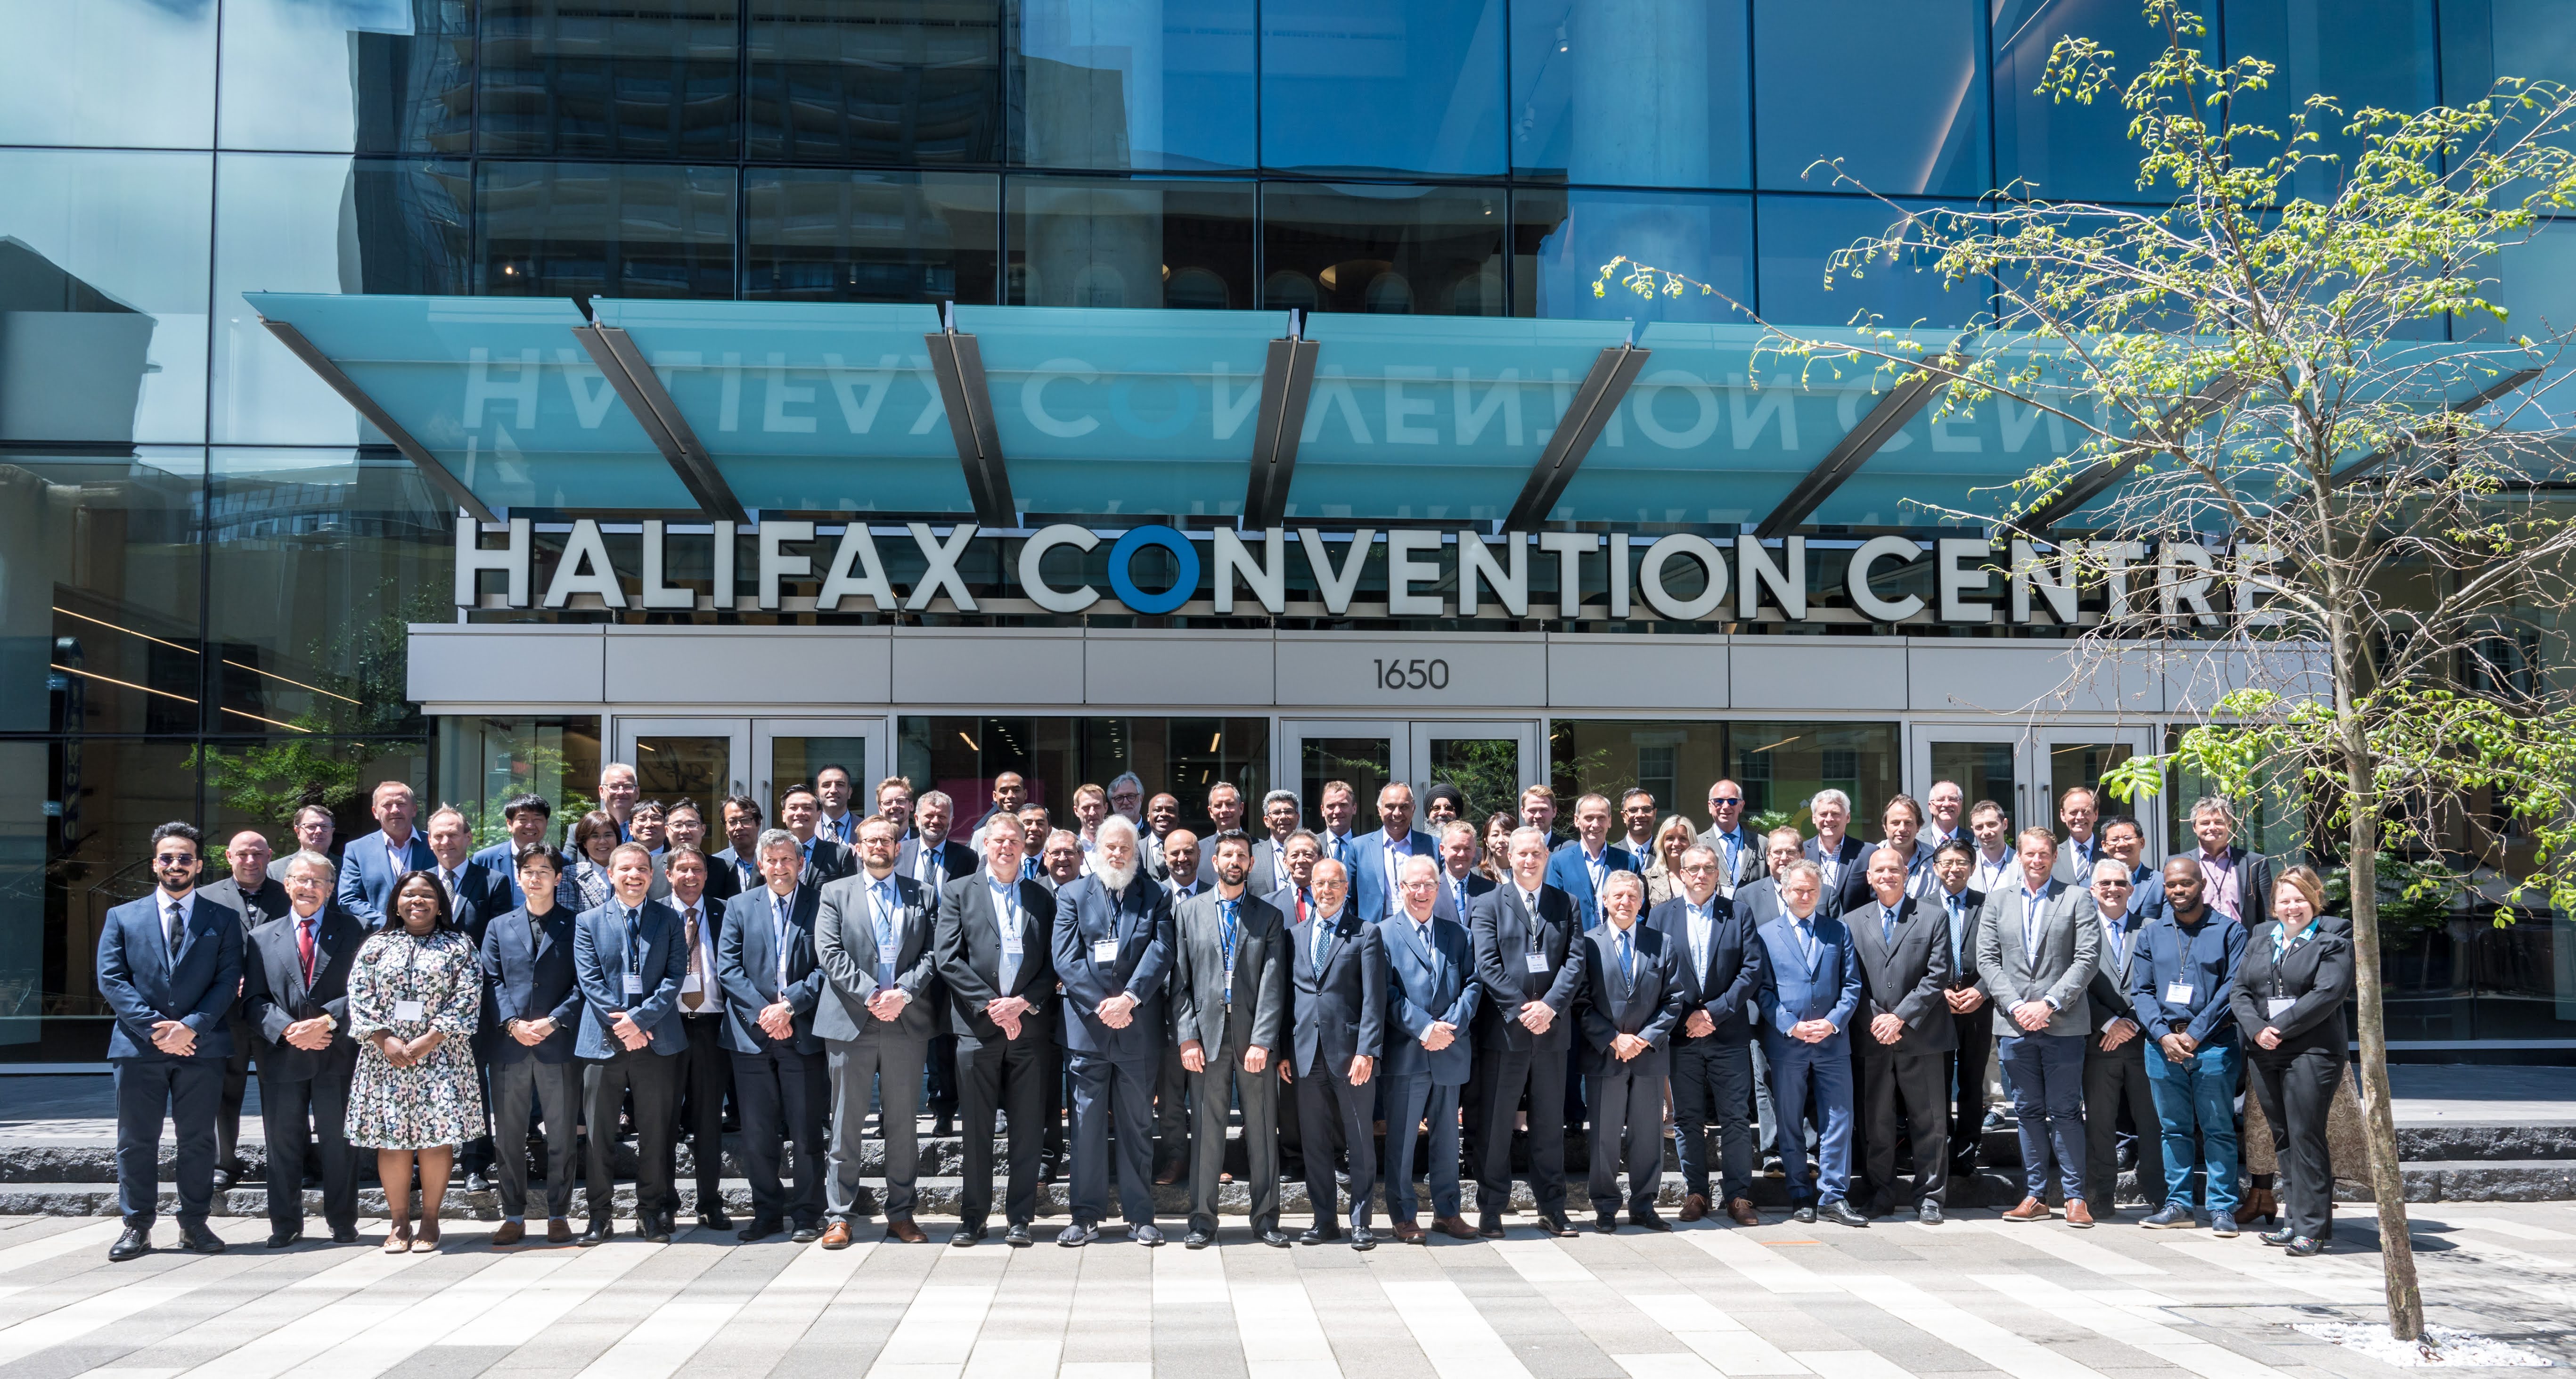 IECEE attendees pose for a photo outside Halifax Convention Centre on Argyle Street